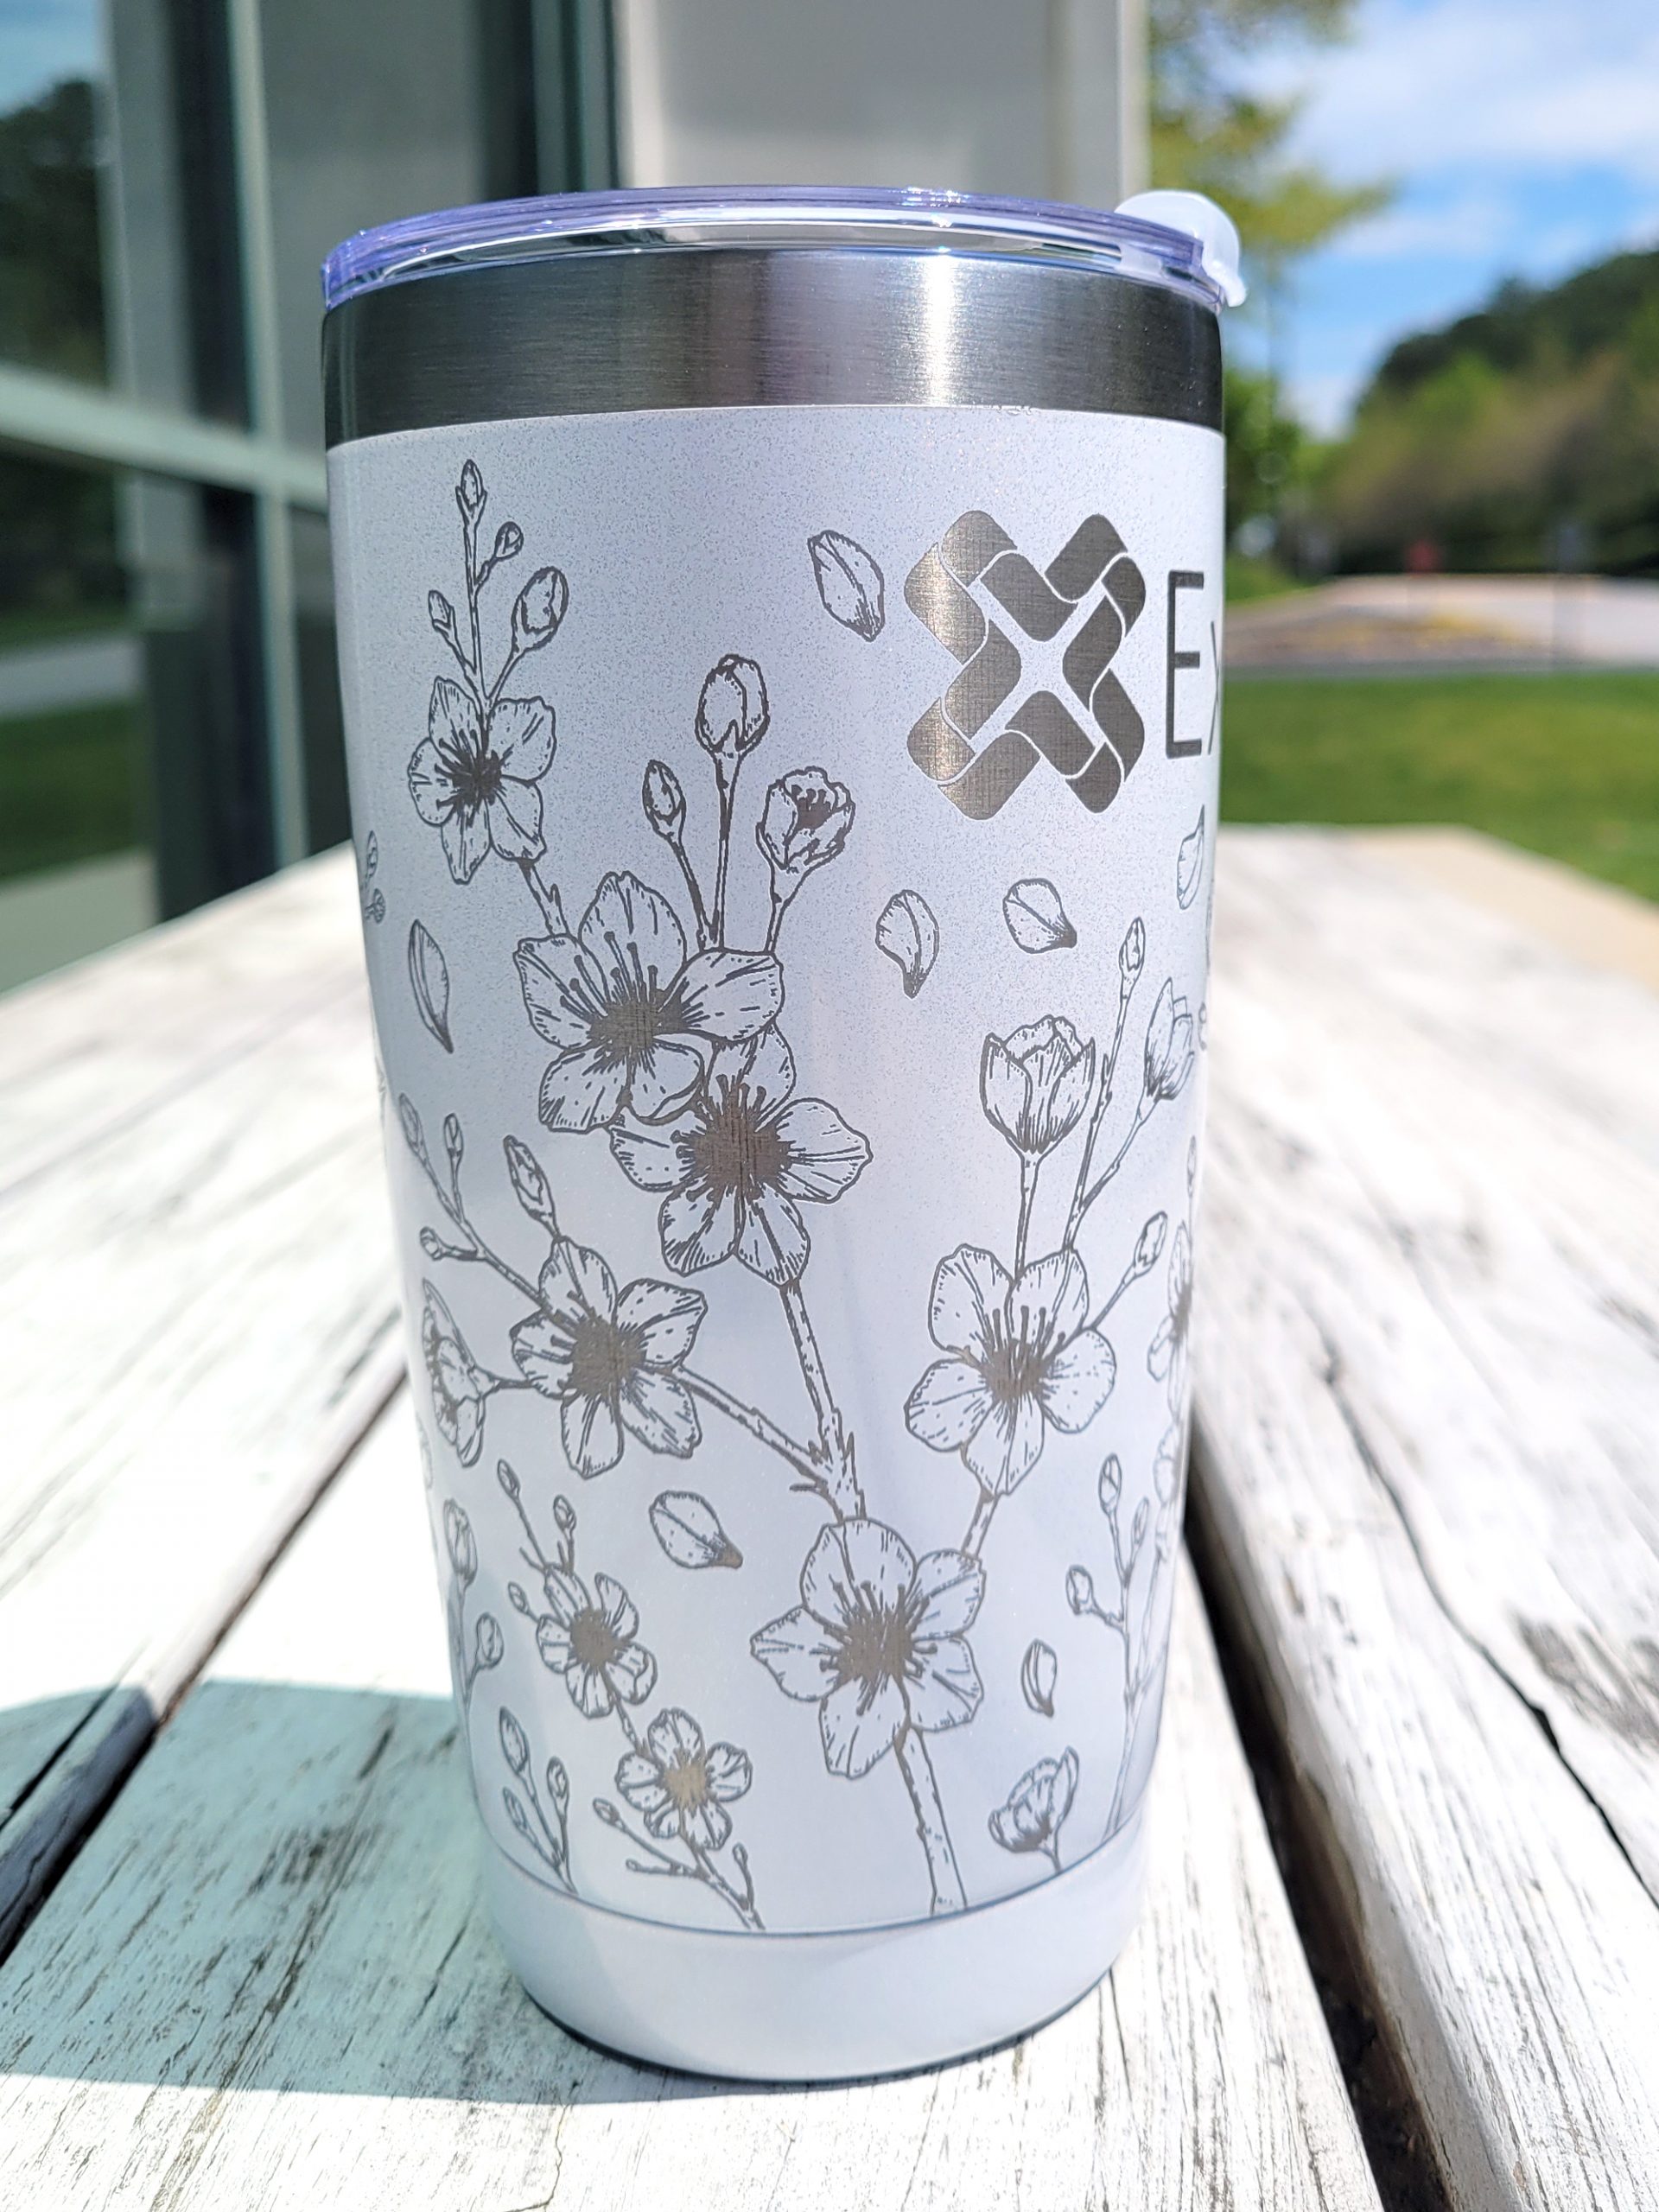 Personalized Tumblers with Straws - Custom Cups with Lids & Straws